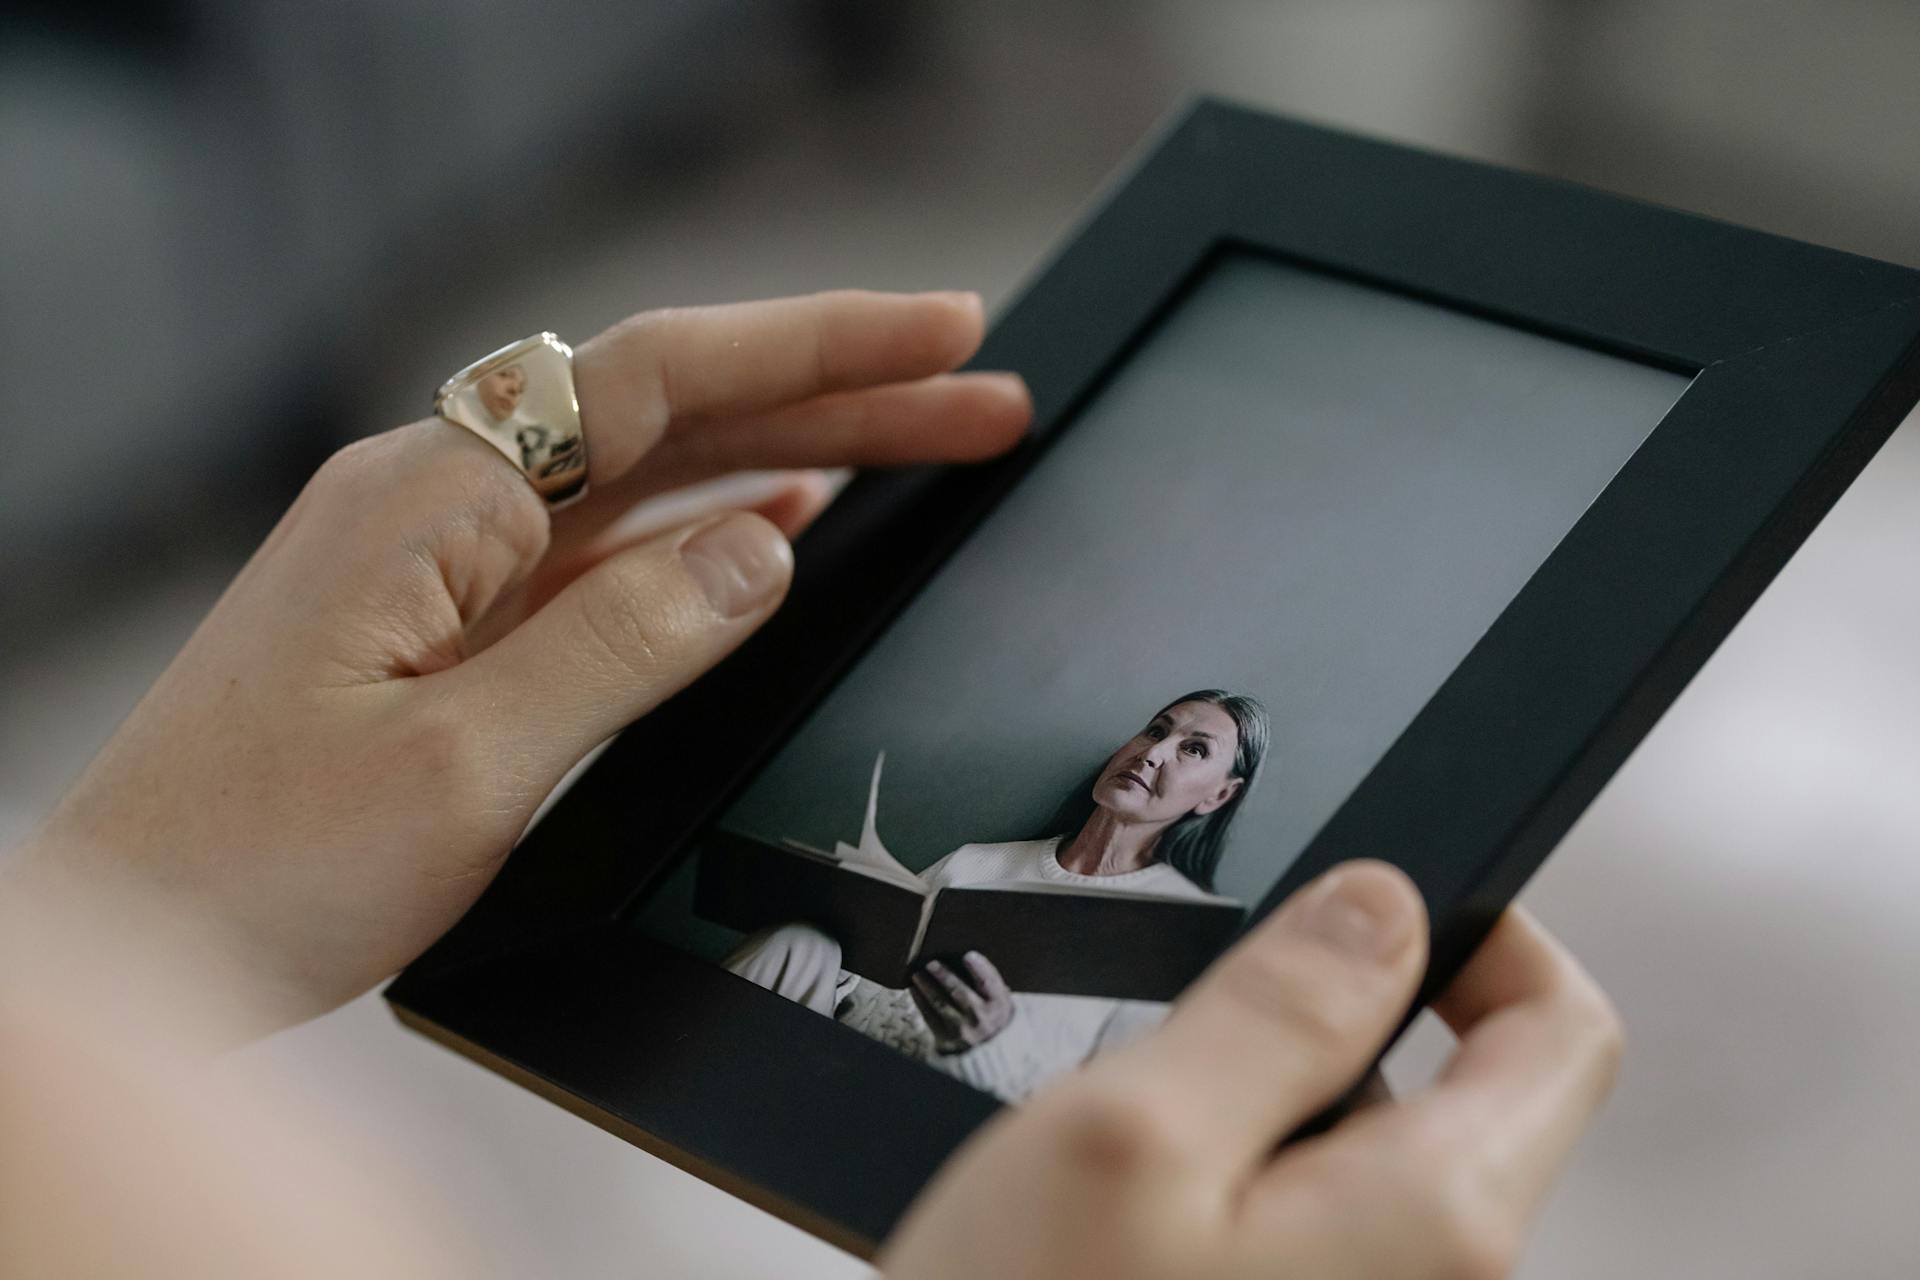 A person holding a black photo frame | Source: Pexels